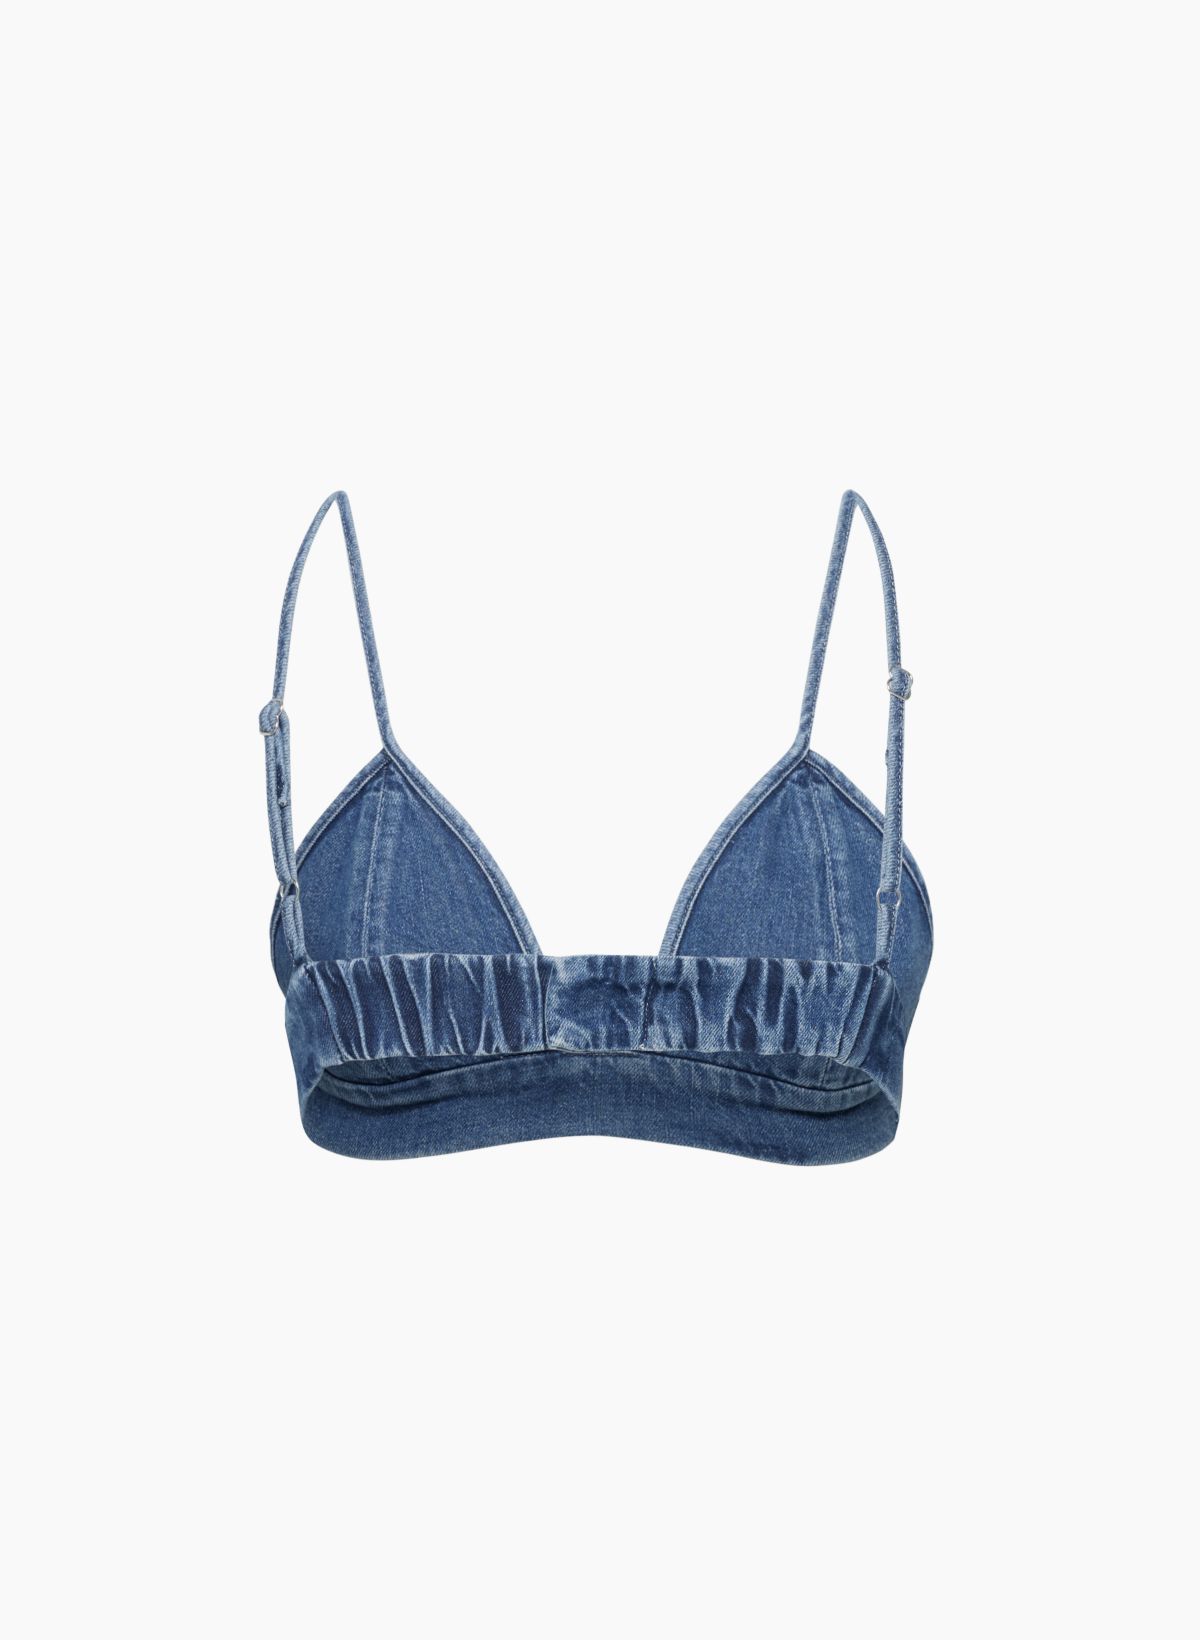 AGOLDE - Bralette Top  HBX - Globally Curated Fashion and